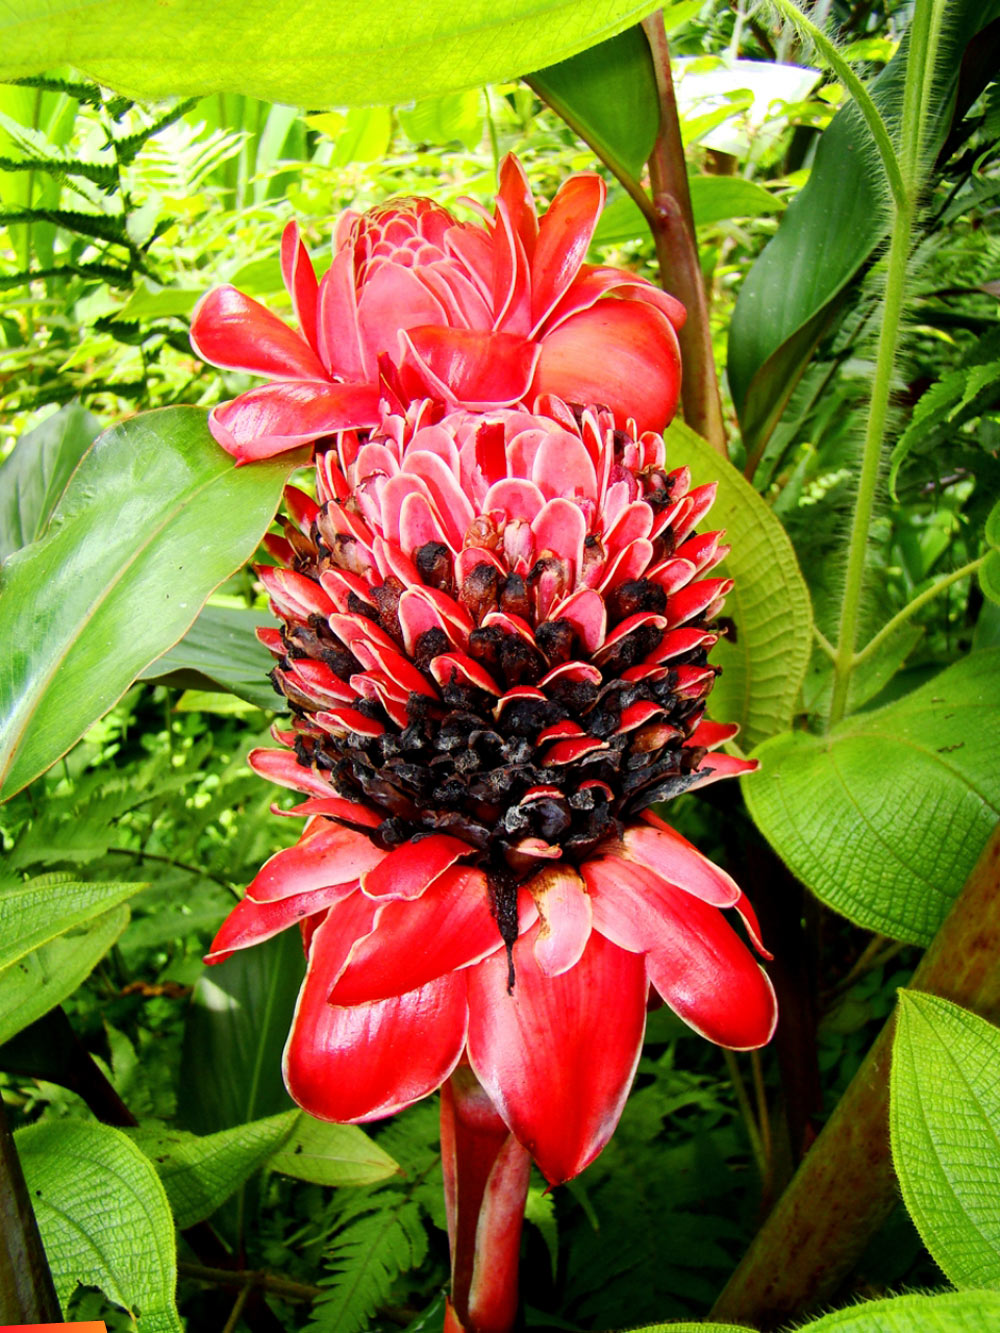 Red Torch Ginger Flower